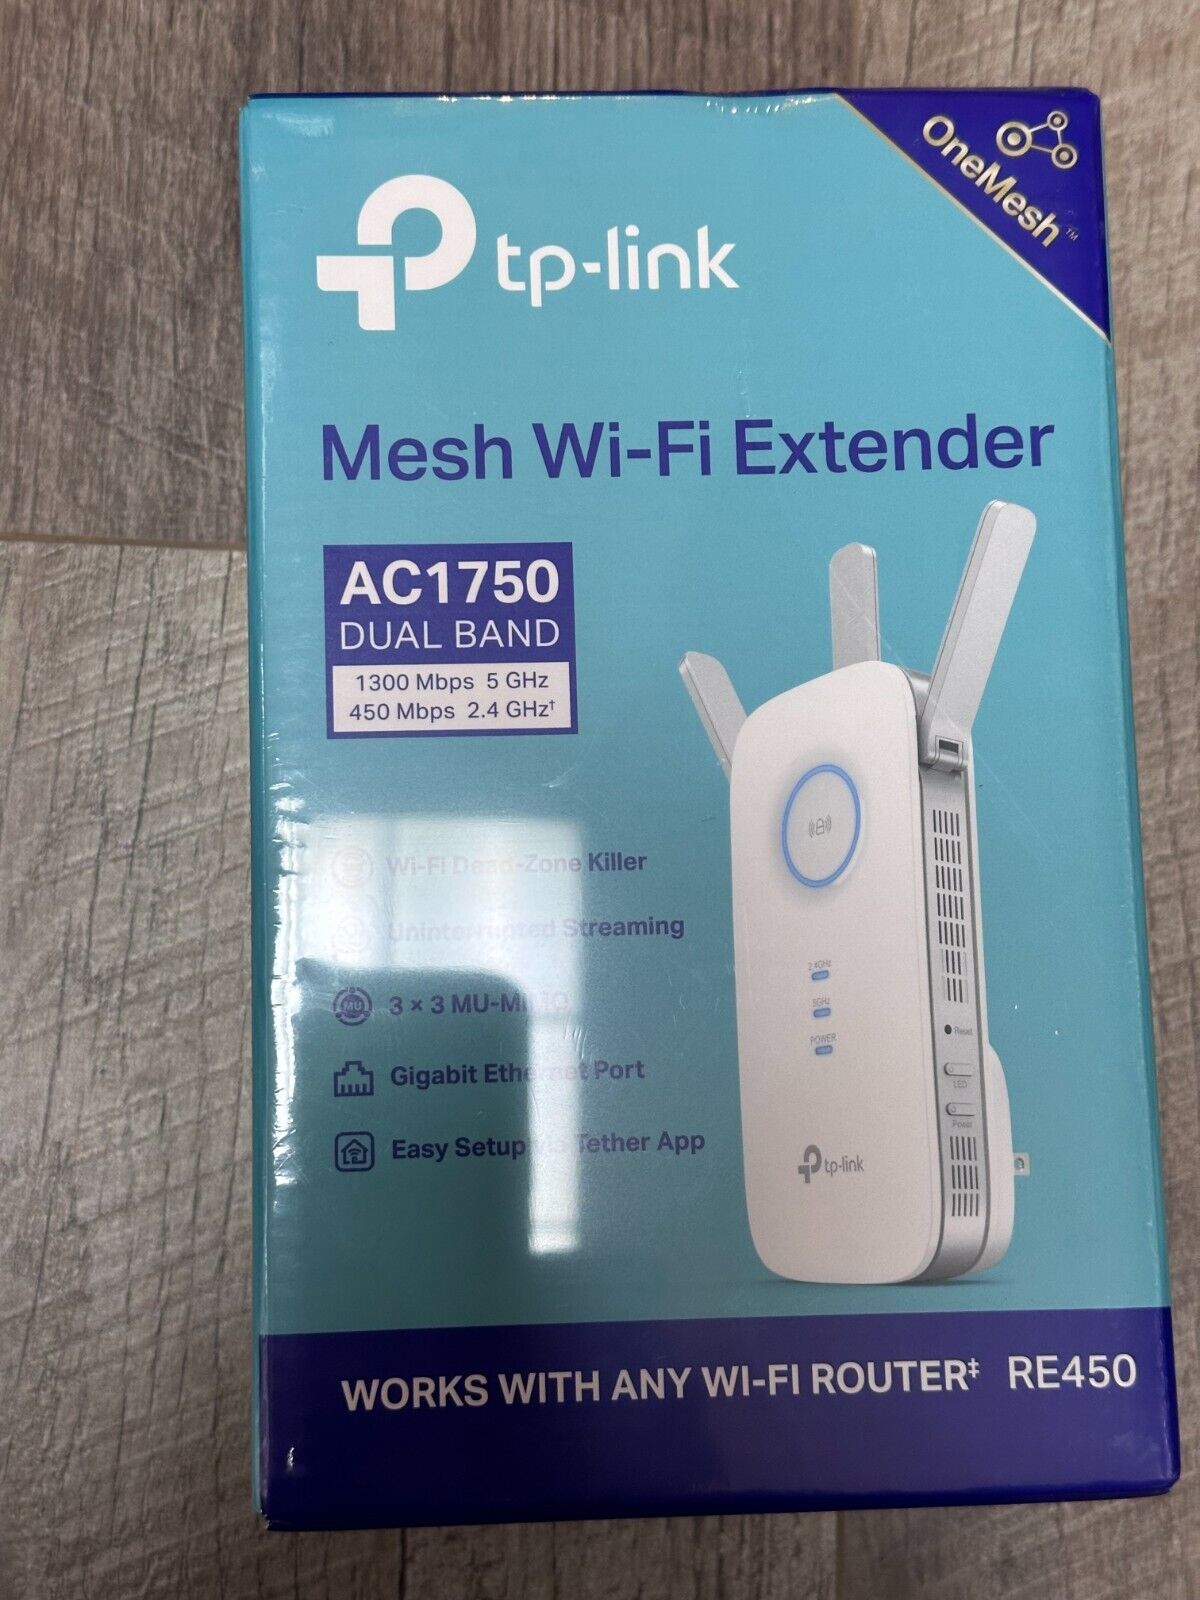 Brand new TP-LINK AC1750 Wi-Fi Dual Band Plug In Range Extender - White (RE450)